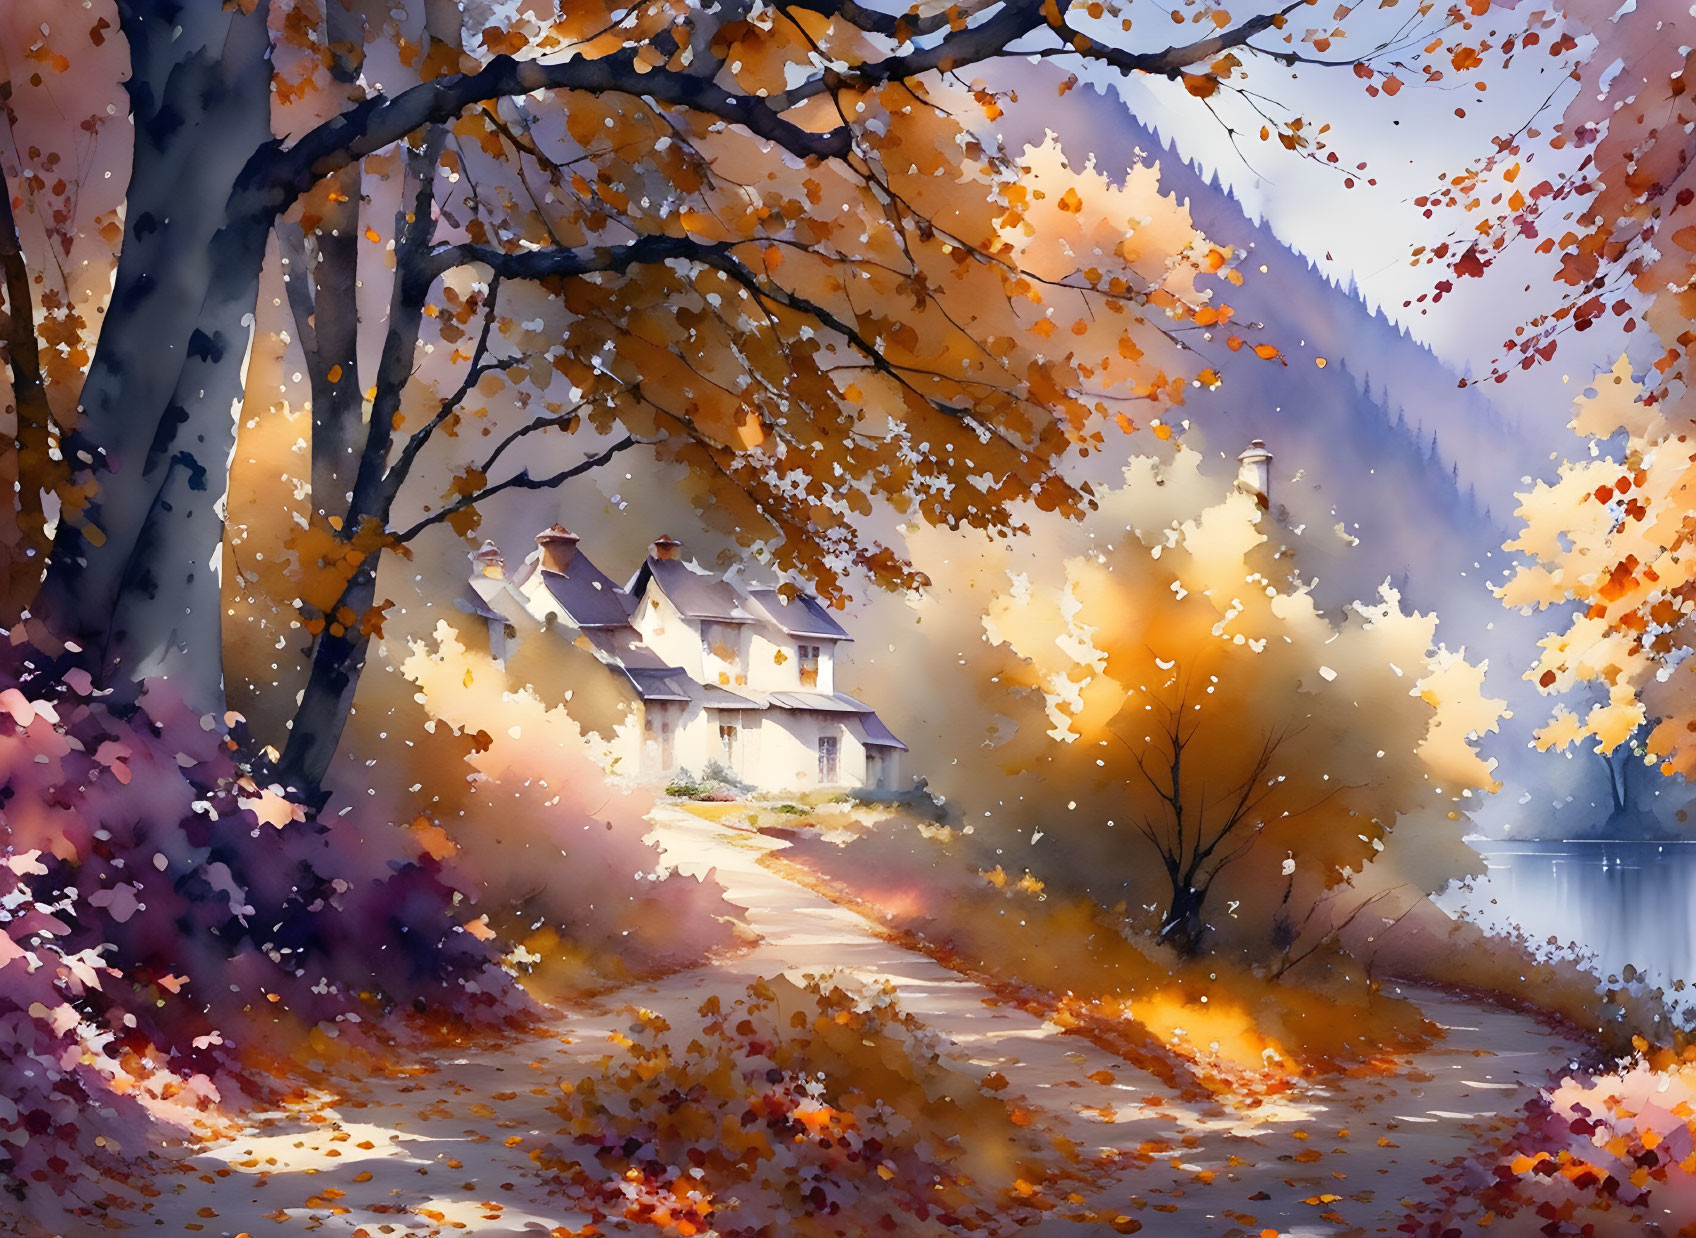 Tranquil autumn landscape with cozy house, vibrant foliage, lake, and mountains